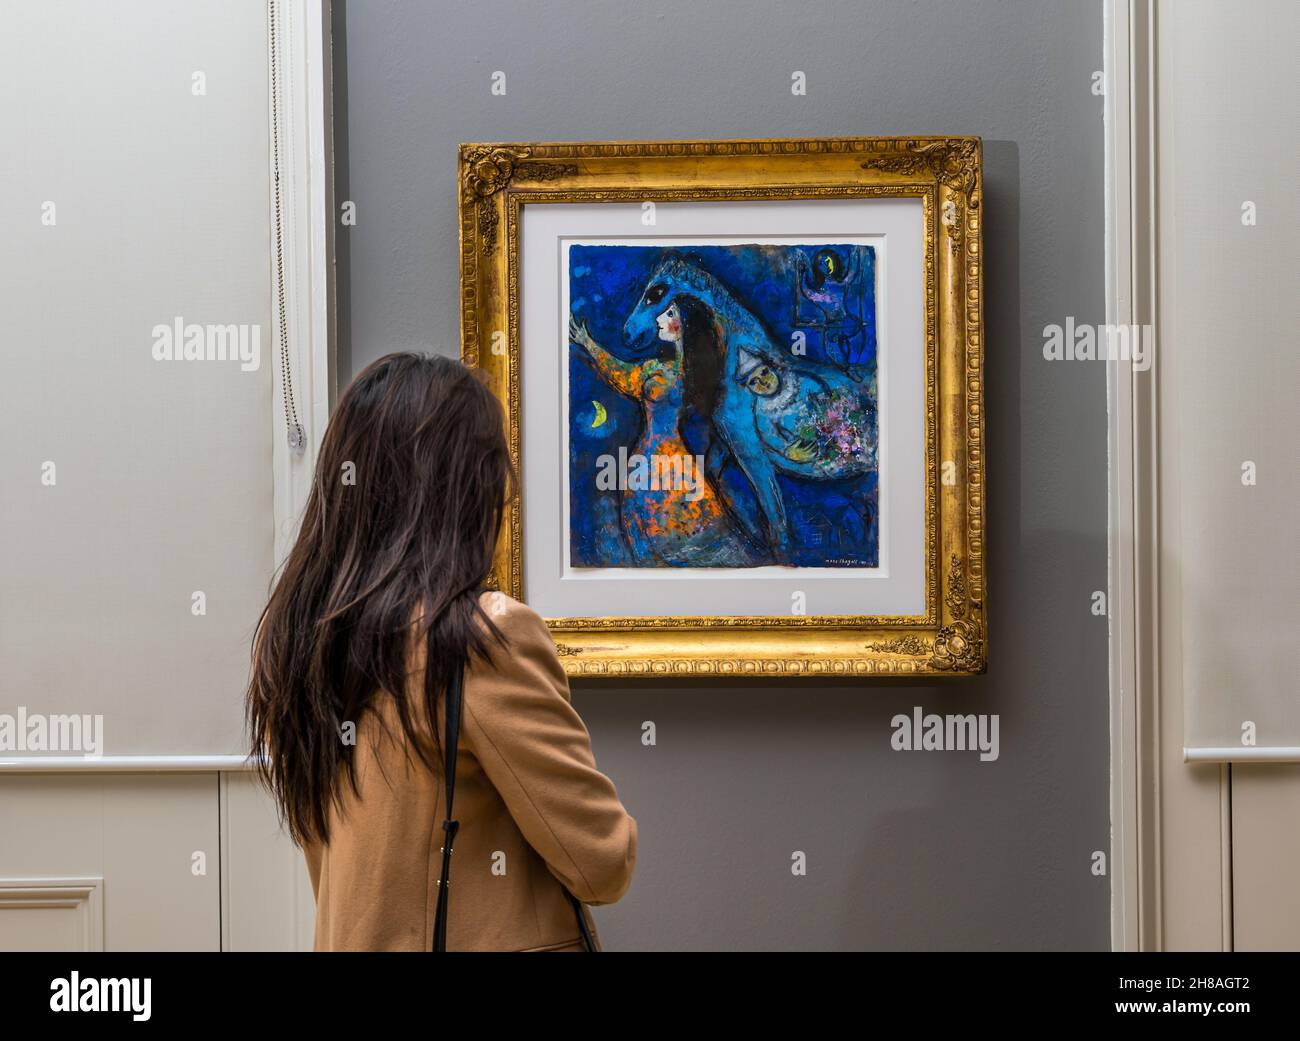 Woman admiring painting by French artist Marc Chagall called The Horse Rider Scottish National Gallery of Modern Art, Edinburgh, Scotland, UK Stock Photo